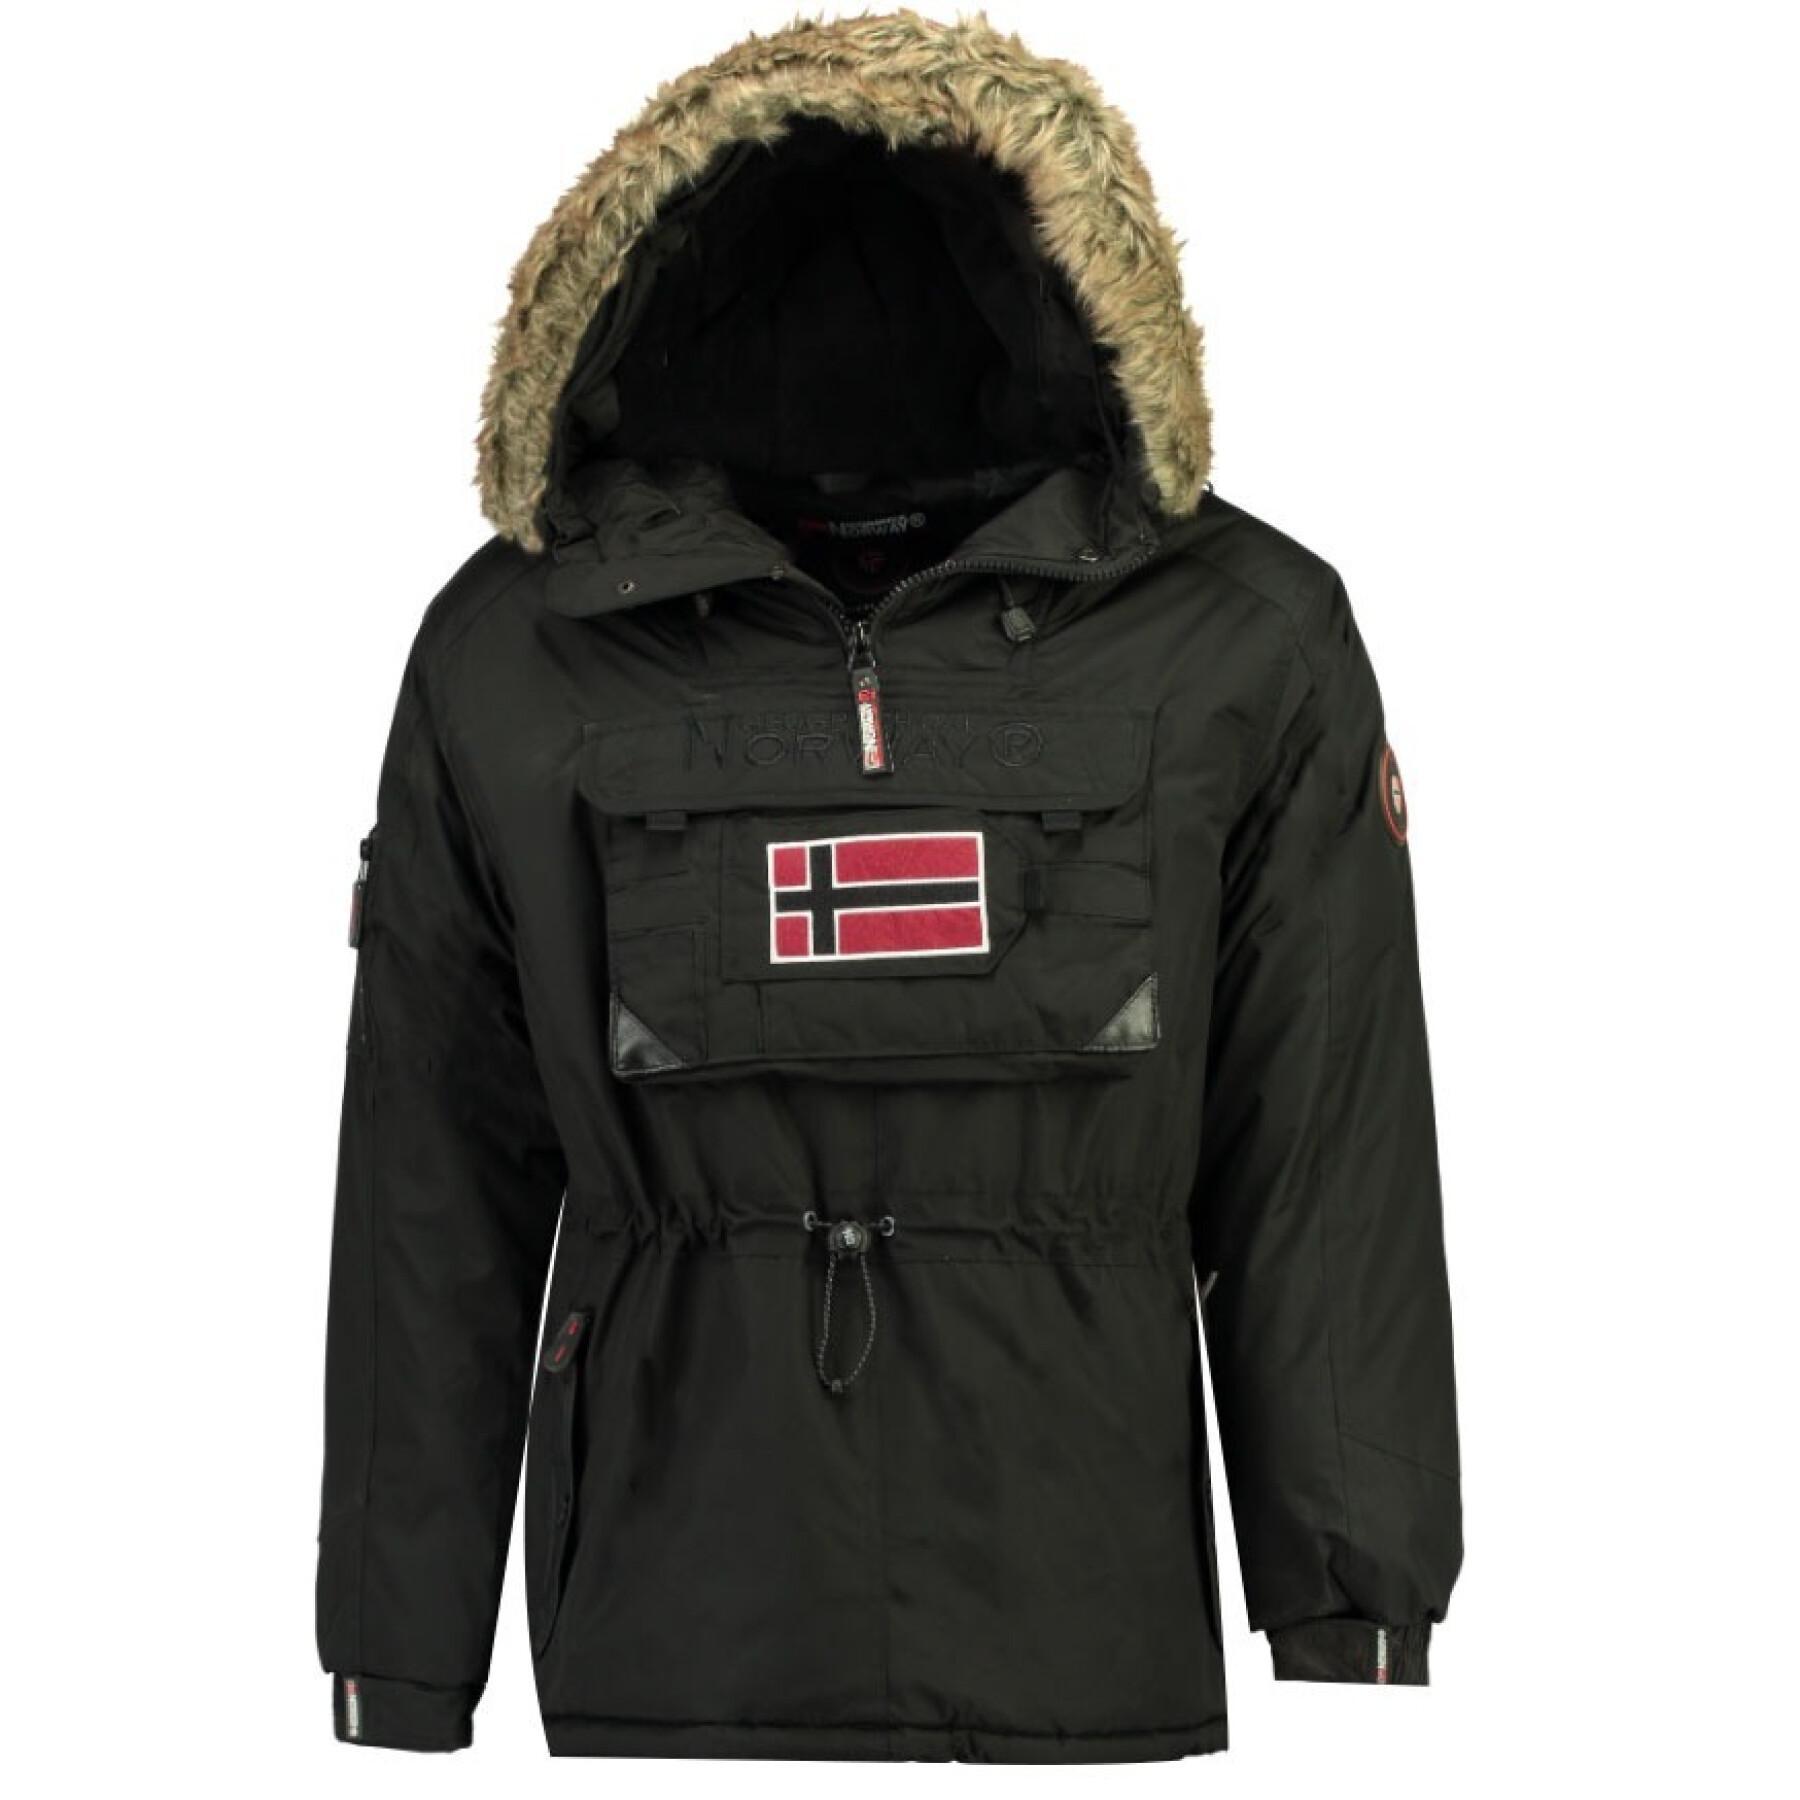 Parkas med huva Geographical Norway Beco